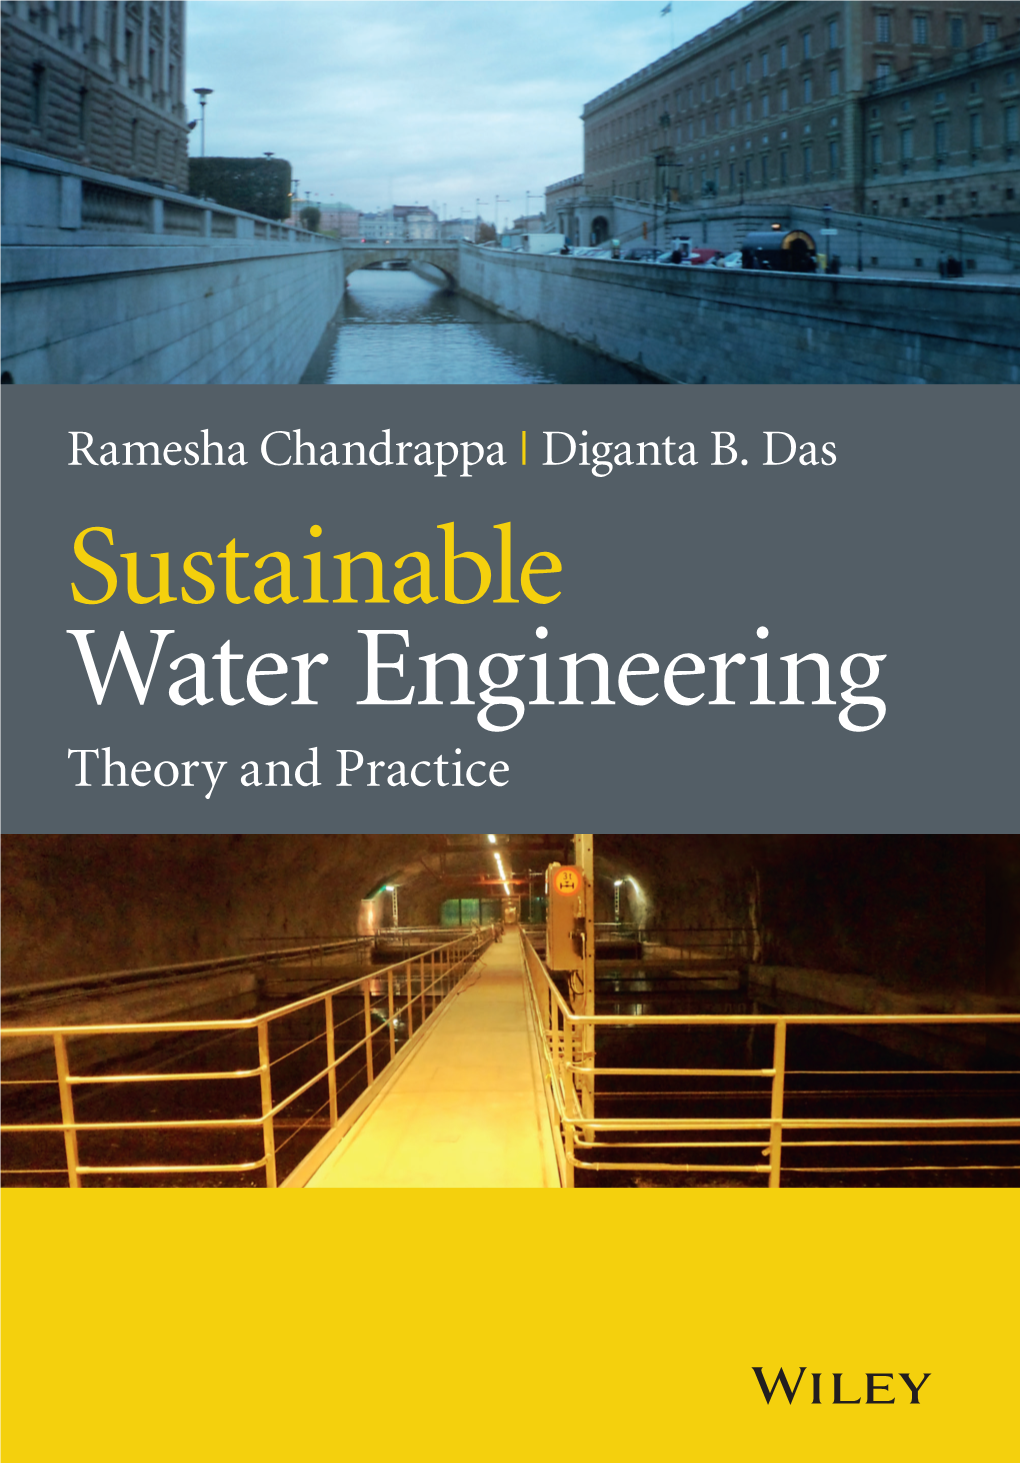 Sustainable Water Engineering Theory and Practice